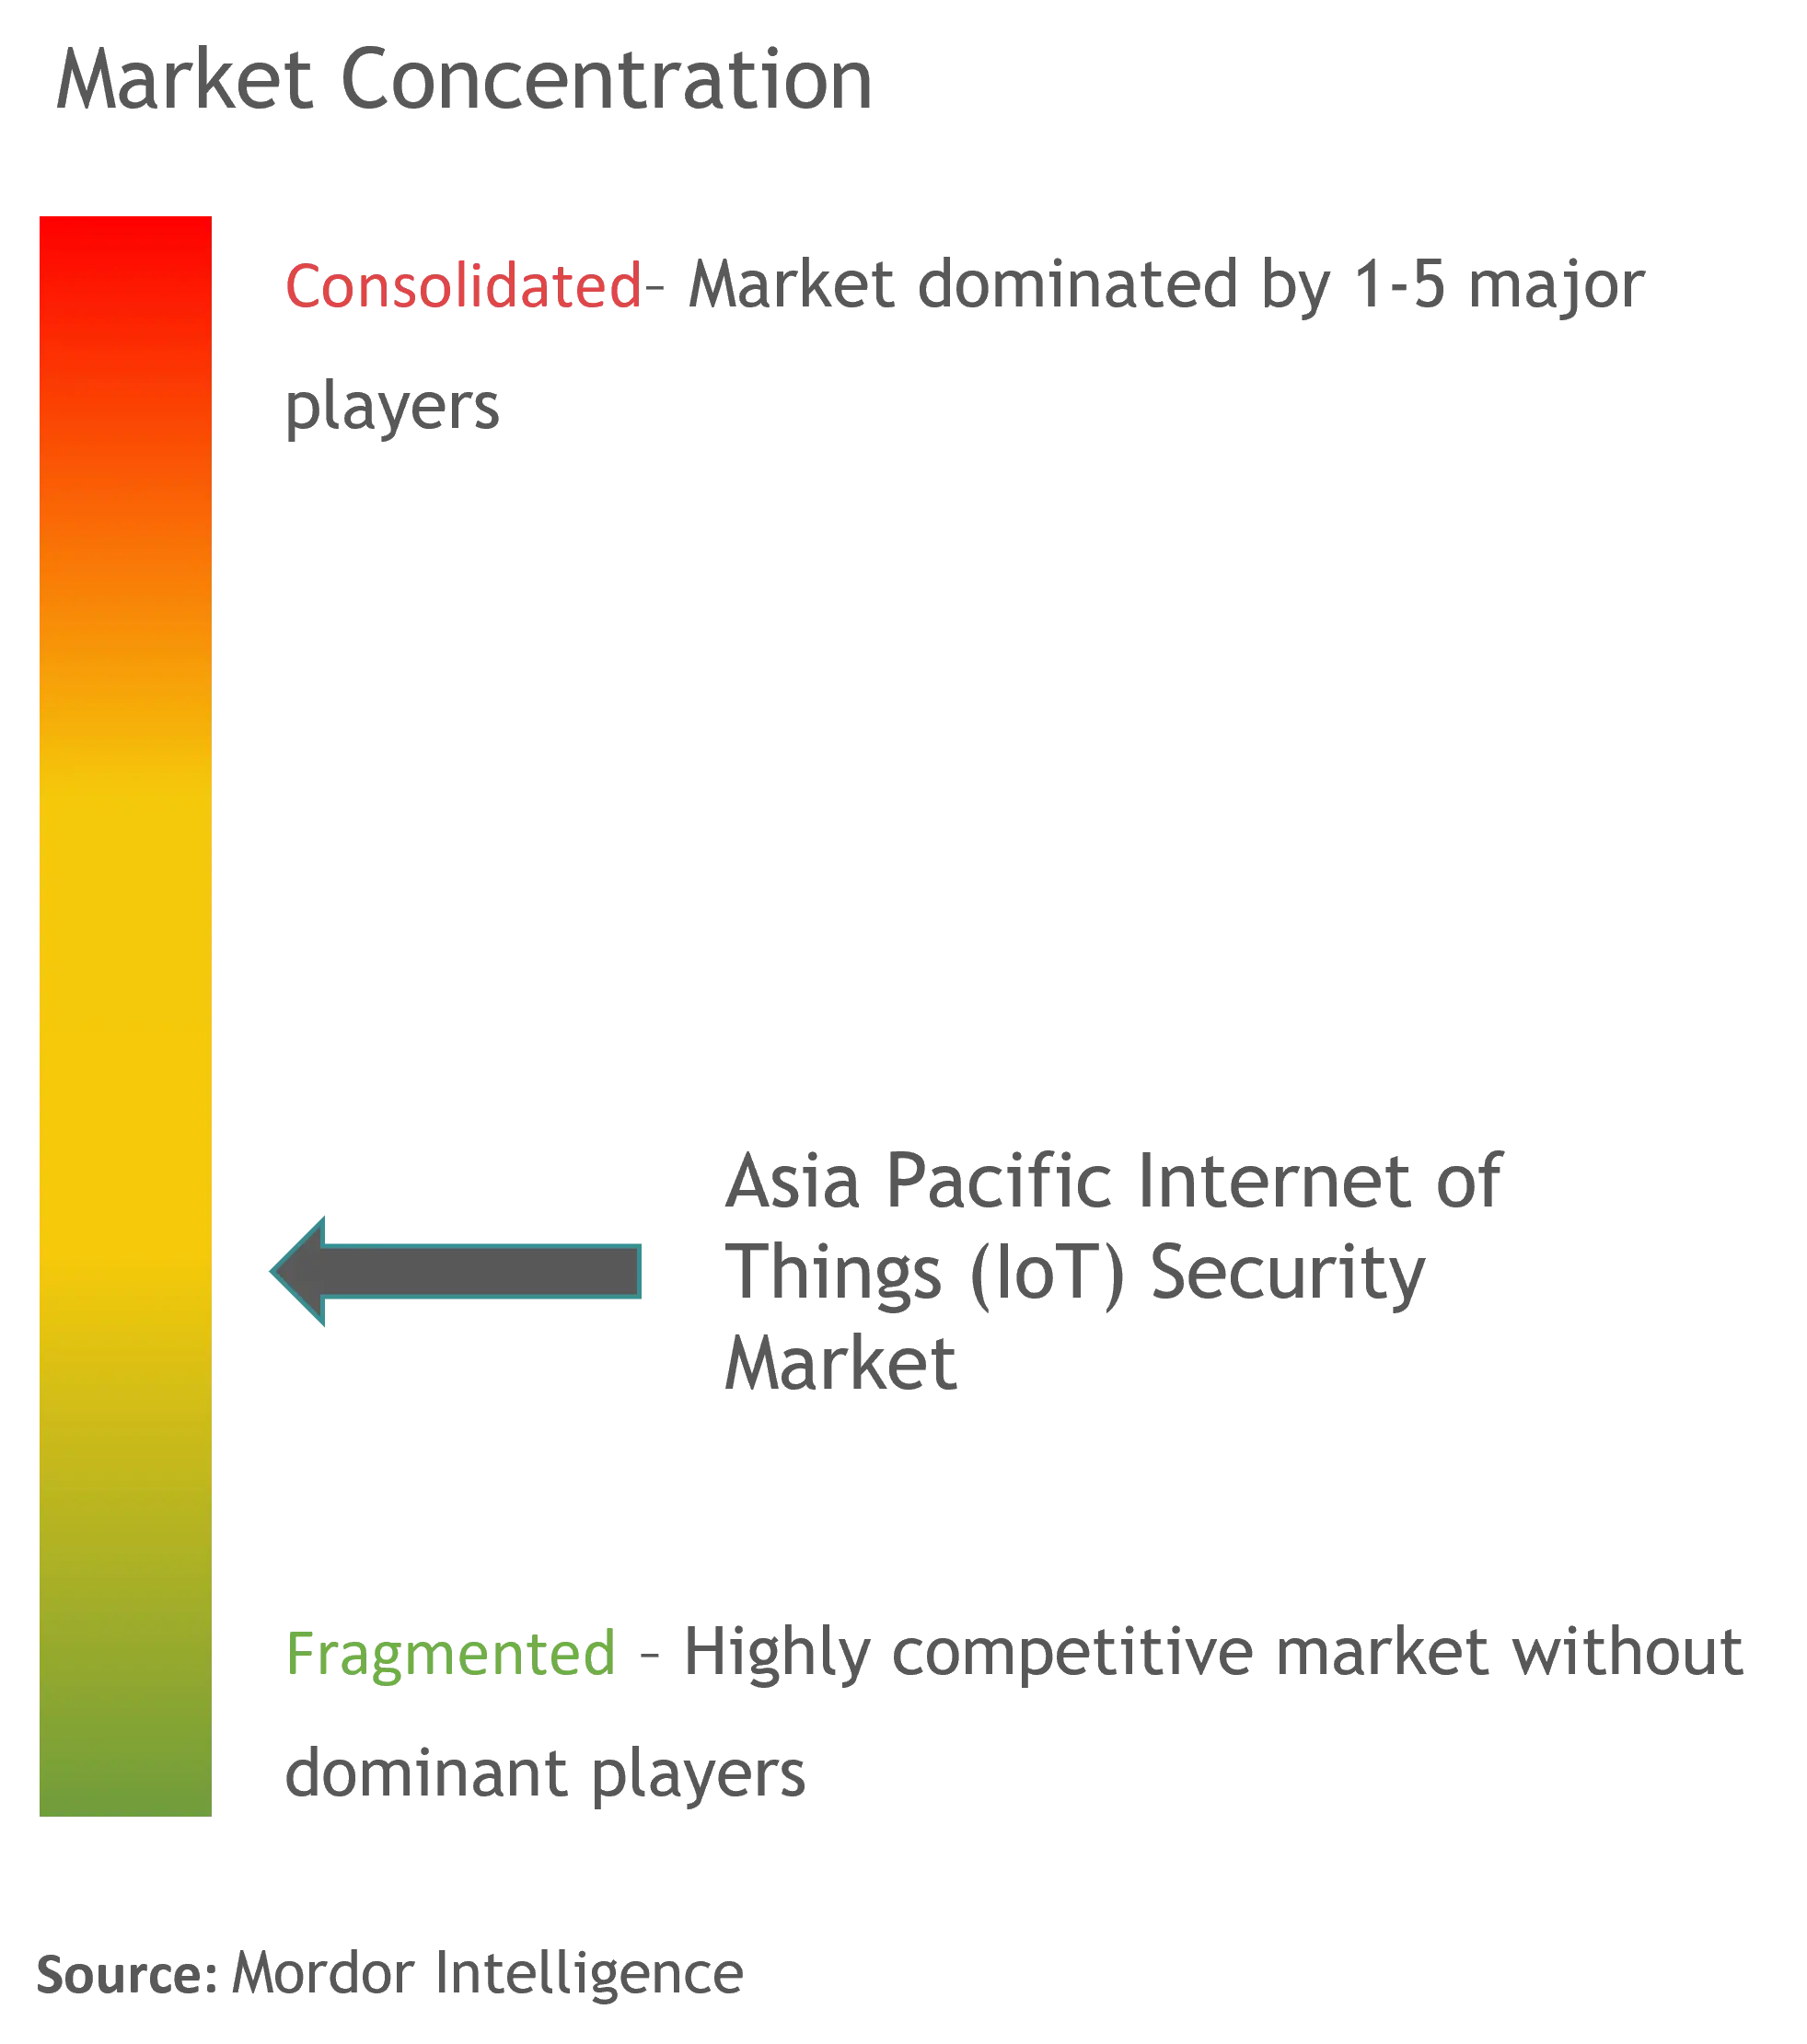 Asia Pacific Internet of Things (IoT) Security Market